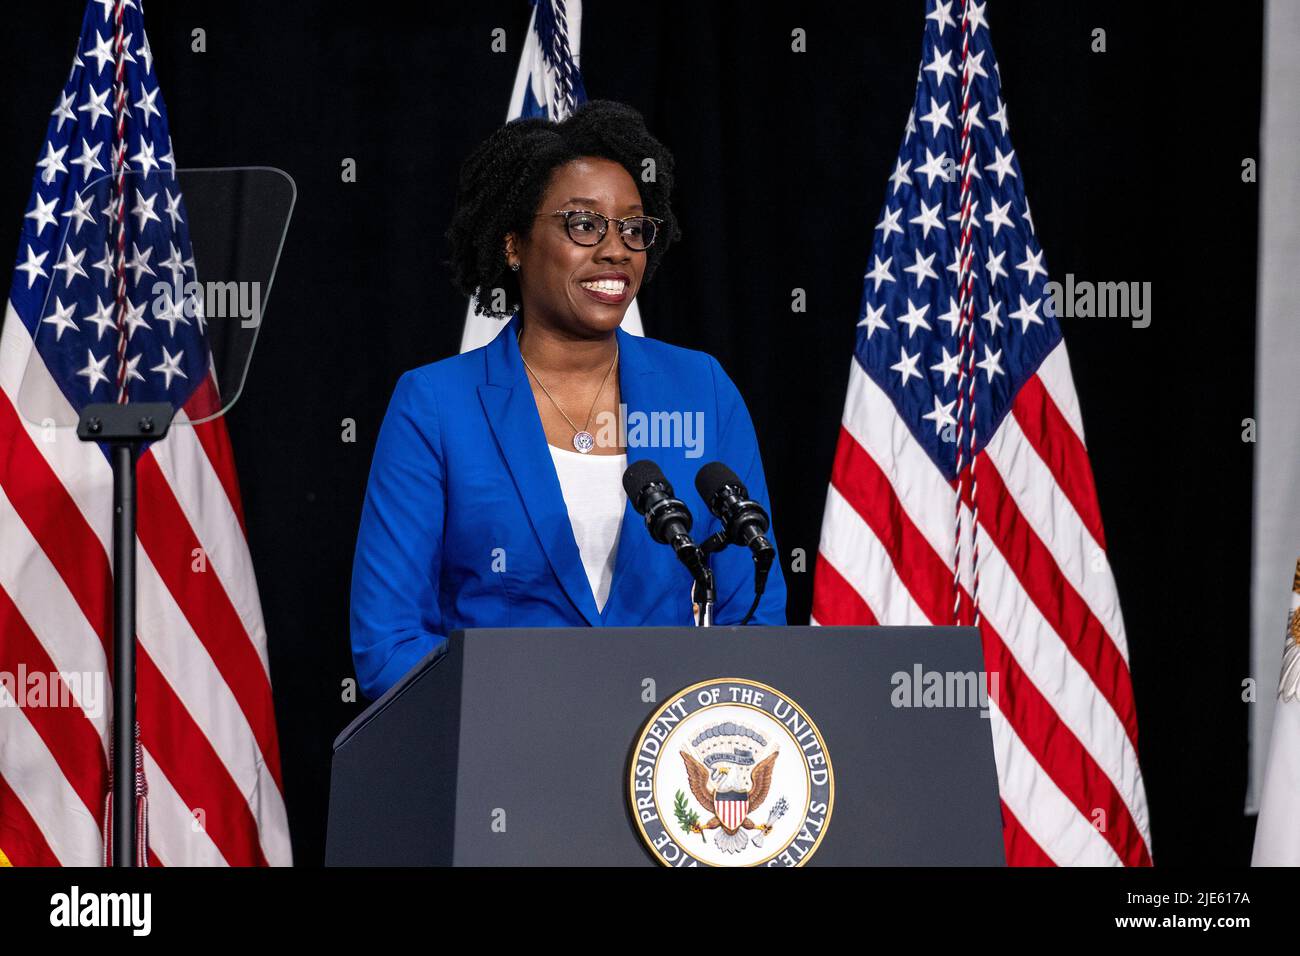 United States Representative Lauren Underwood (Democrat of Illinois) speaks about maternal health care at an event with US Vice President Kamala Harris at the C.W. Avery Family YMCA on Friday June 24, 2022 in Plainfield, Illinois.Credit: Christopher Dilts/ Pool via CNP /MediaPunch Stock Photo